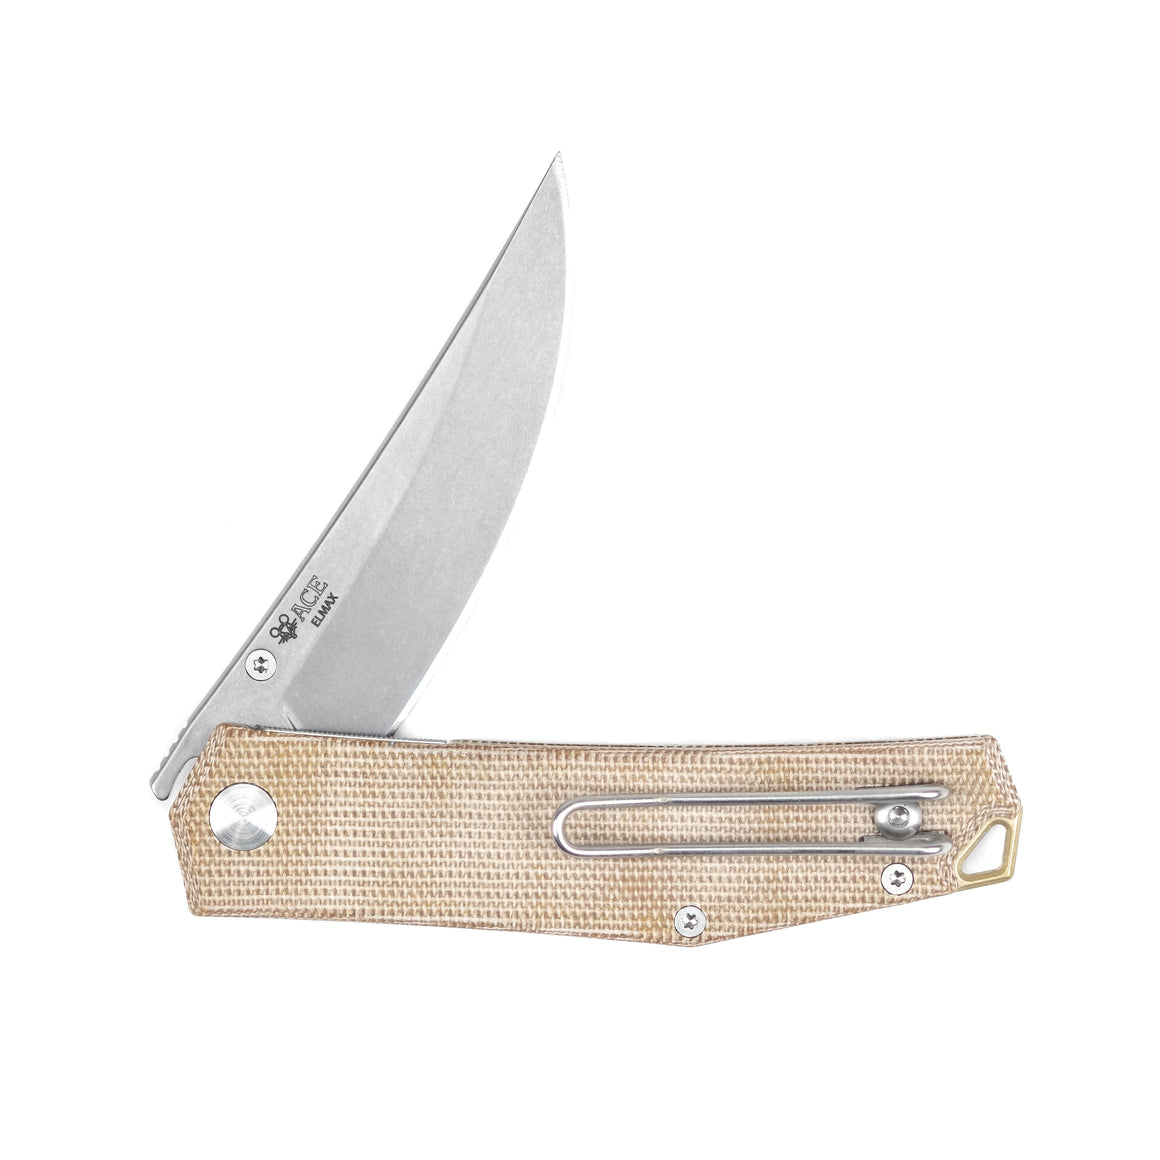 ACE Clyde - Natural Canvas and Brass - Elmax Blade Steel, Stonewash finish - Natural canvas micarta Handle